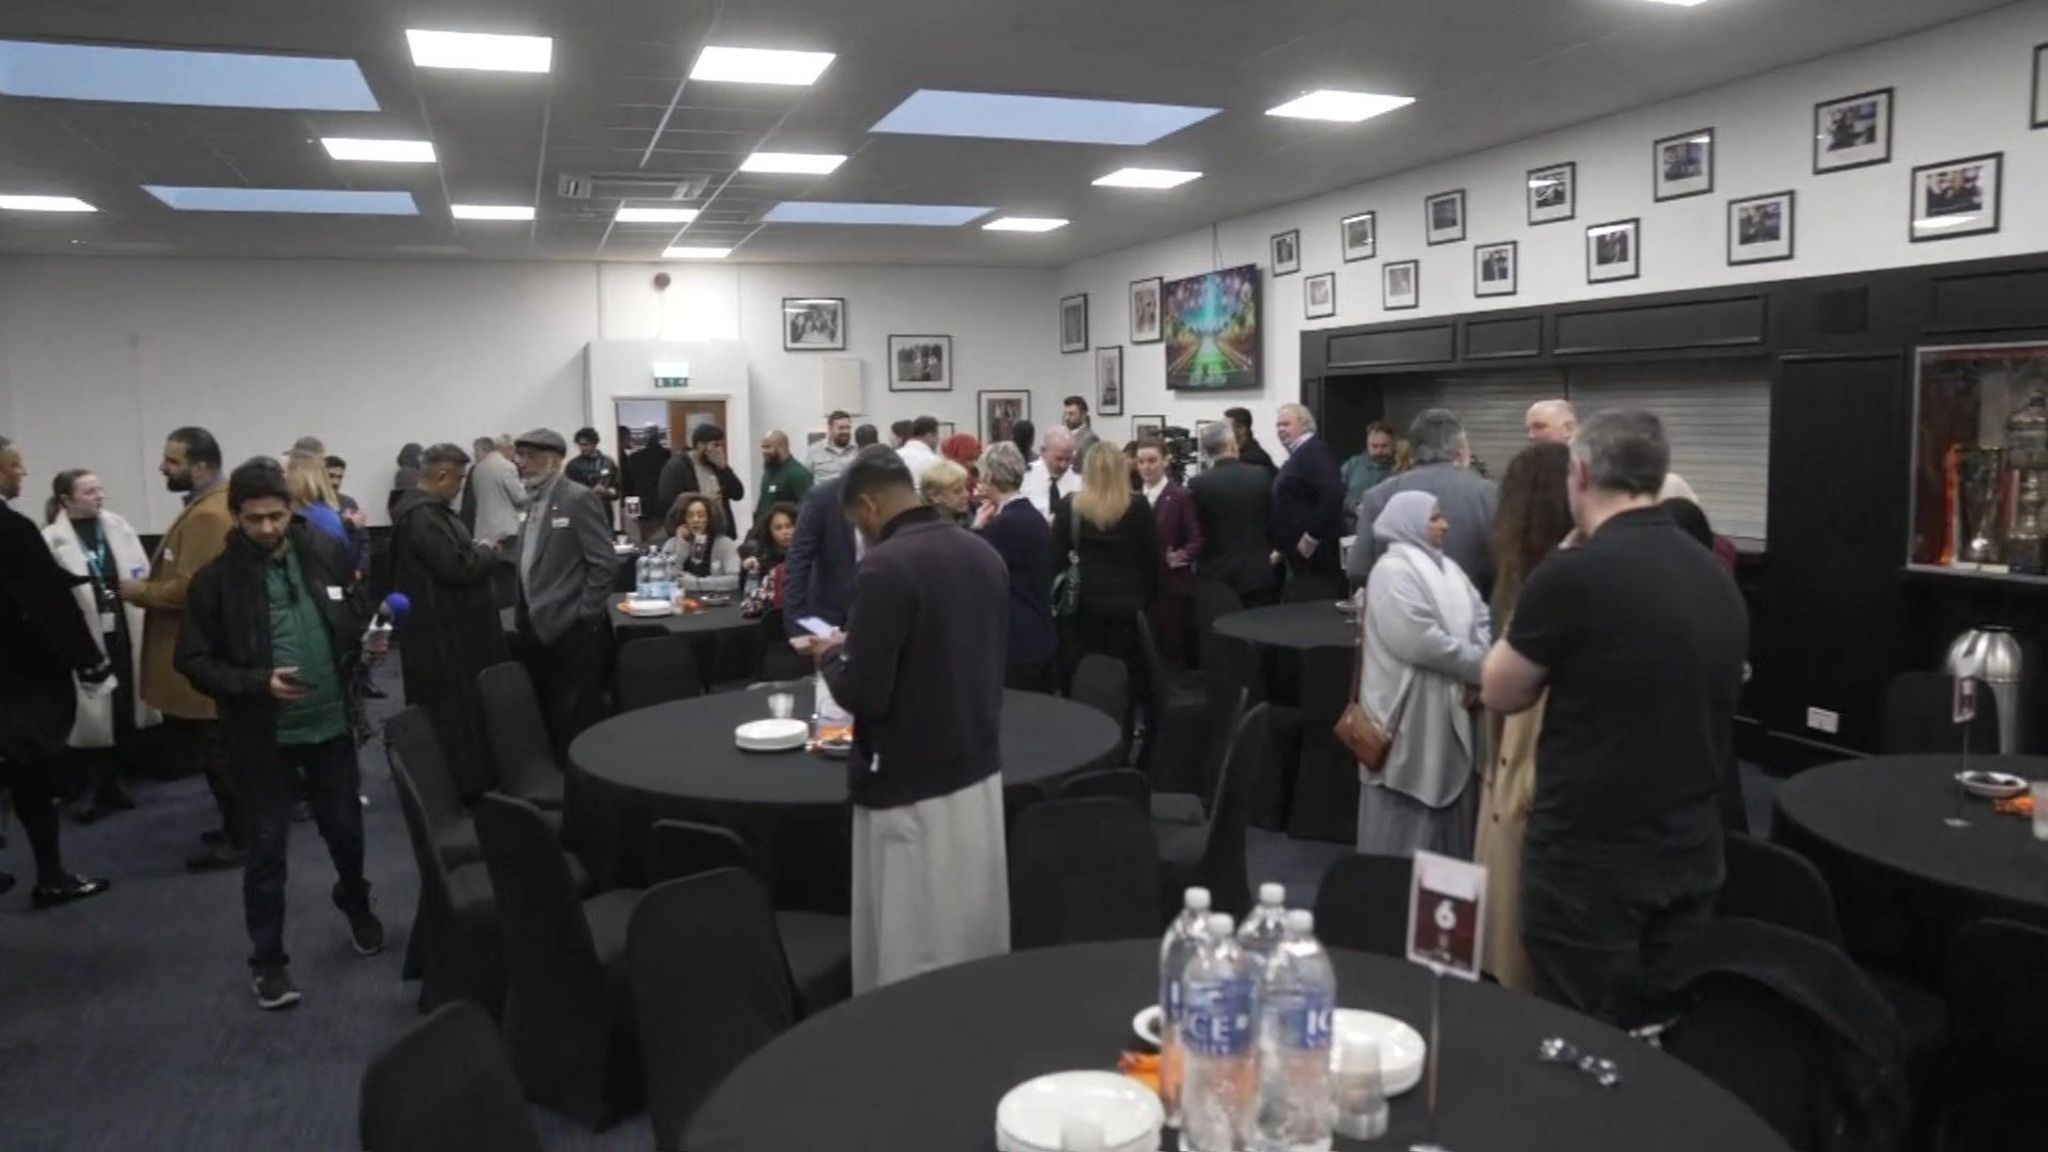 People inside attending the Iftar event at Kenilworth Road